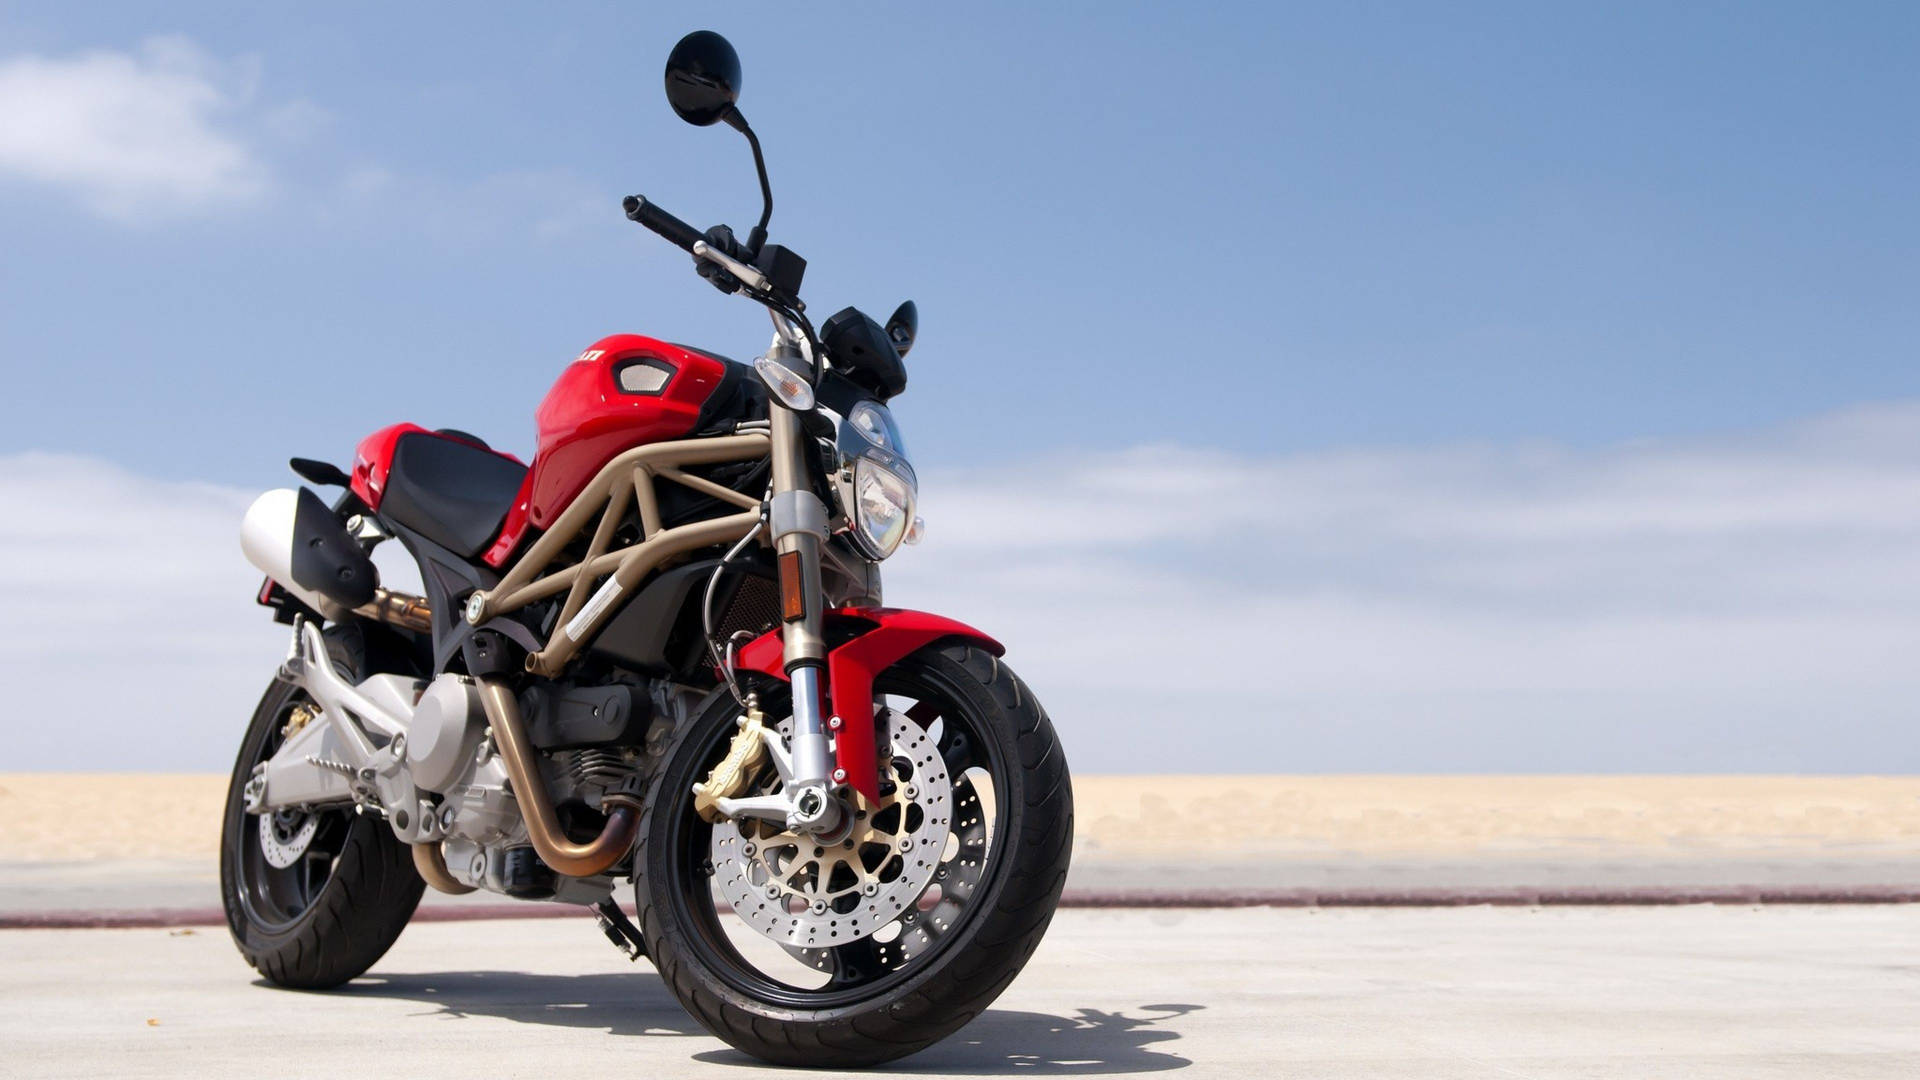 Speed Meets Style on the Red Ducati Diavel Motorbike Wallpaper